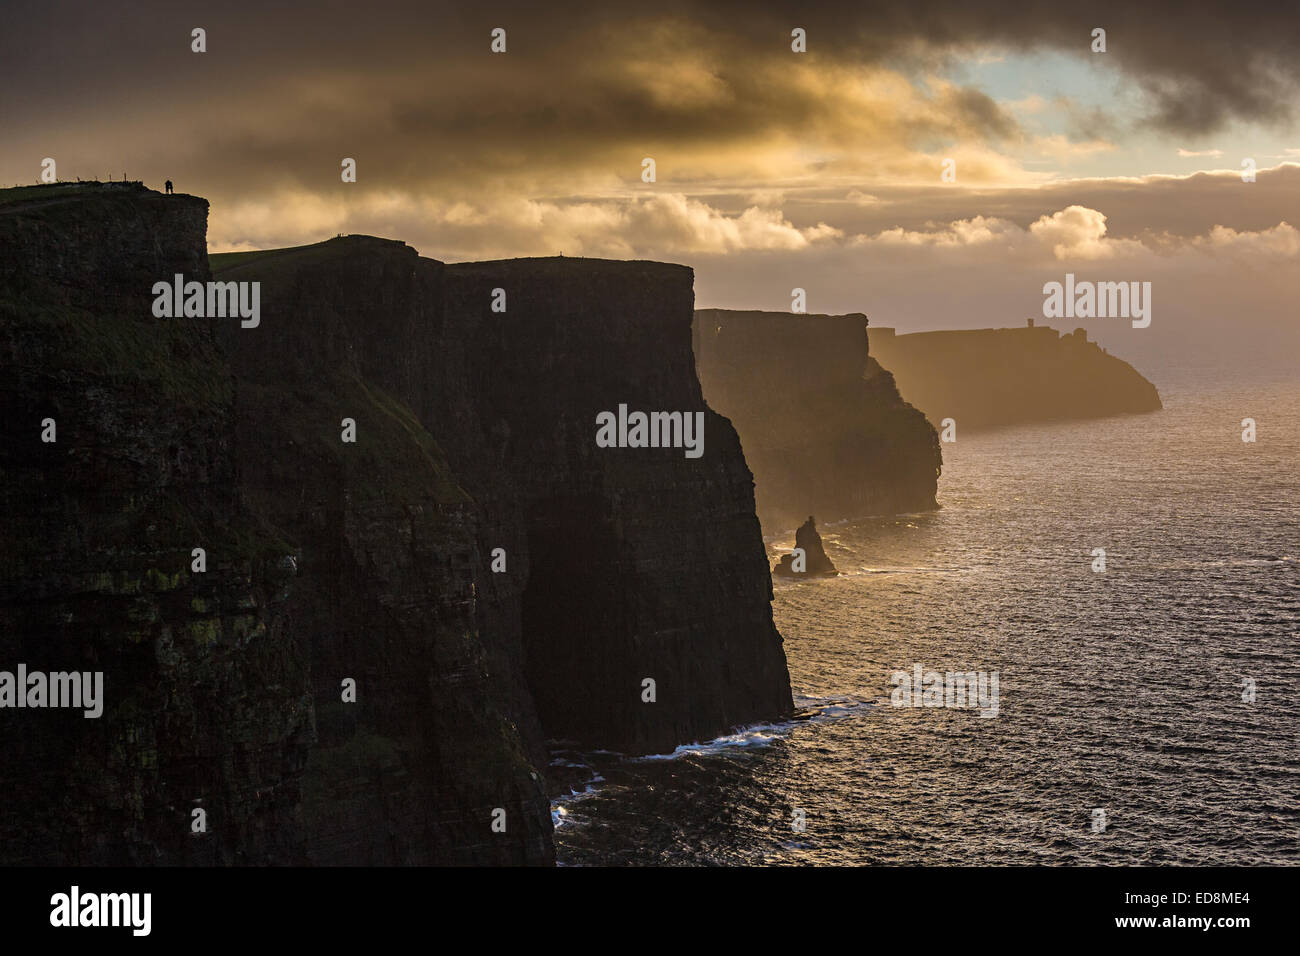 Two people silhouetted on the Cliffs of Moher, Co. Clare, west coast of Ireland Stock Photo